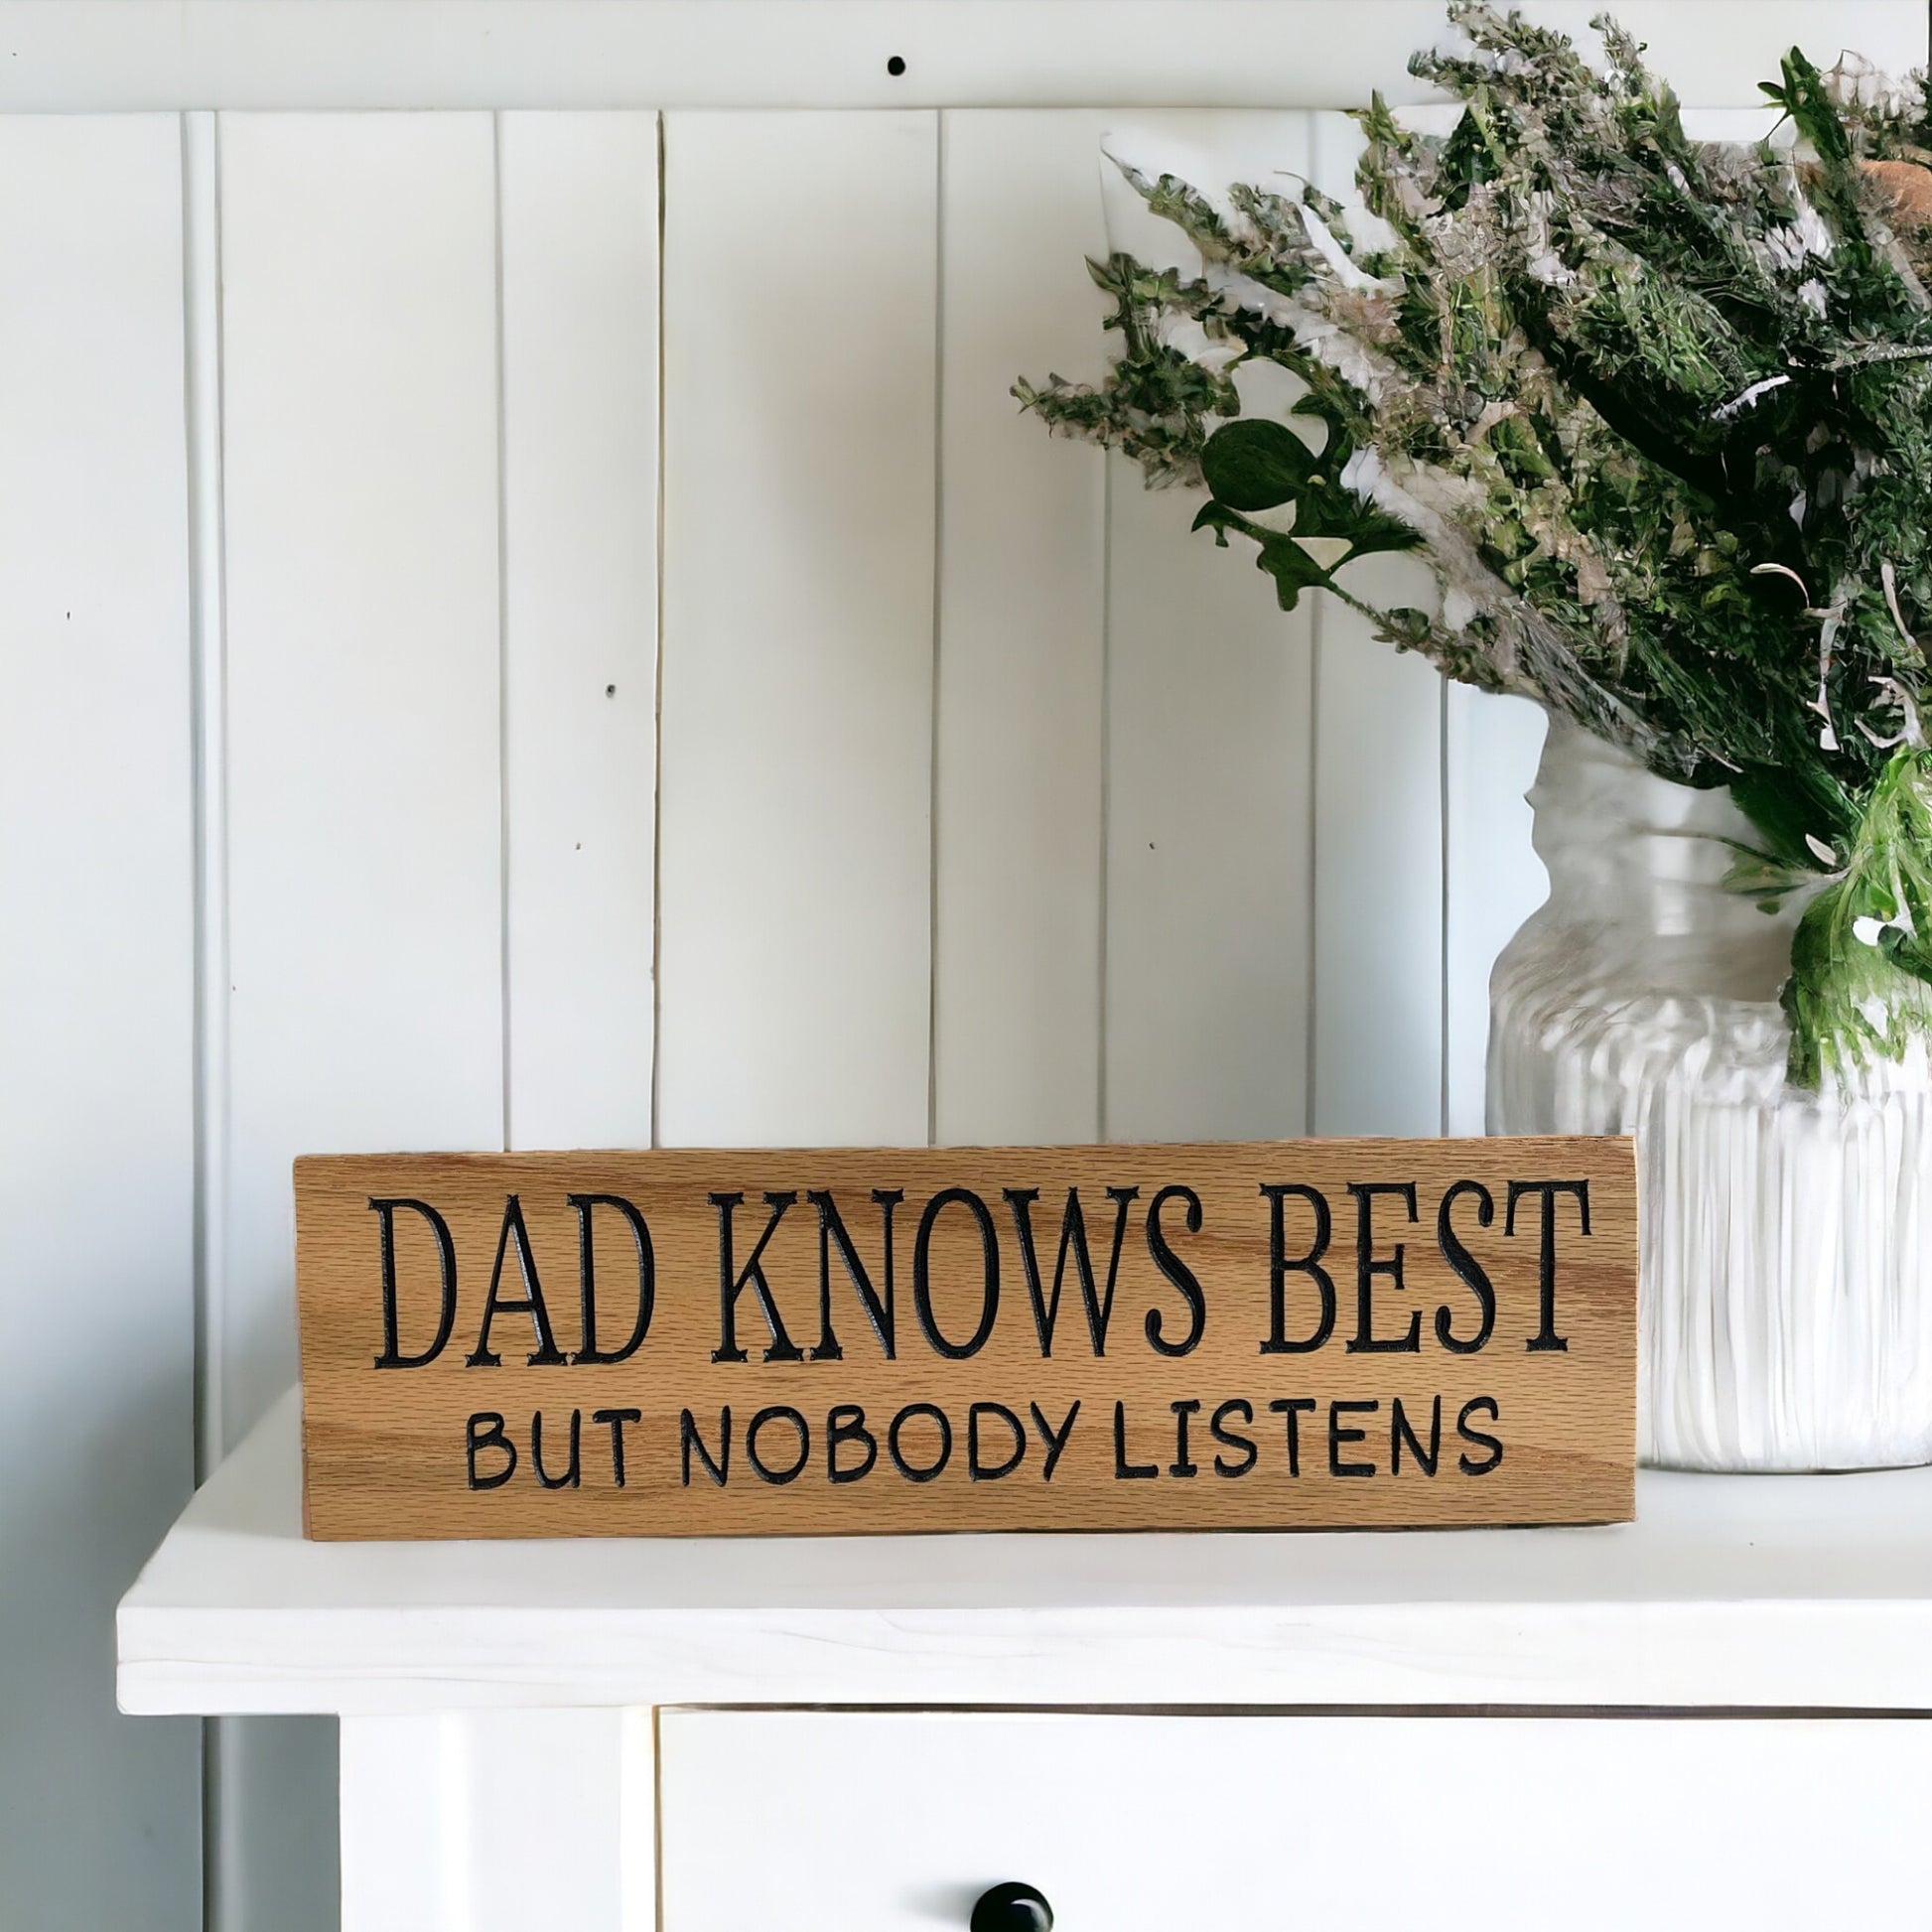 Dad Knows Best but Nobody Listens Carved Wood Sign, 3.5" x 12